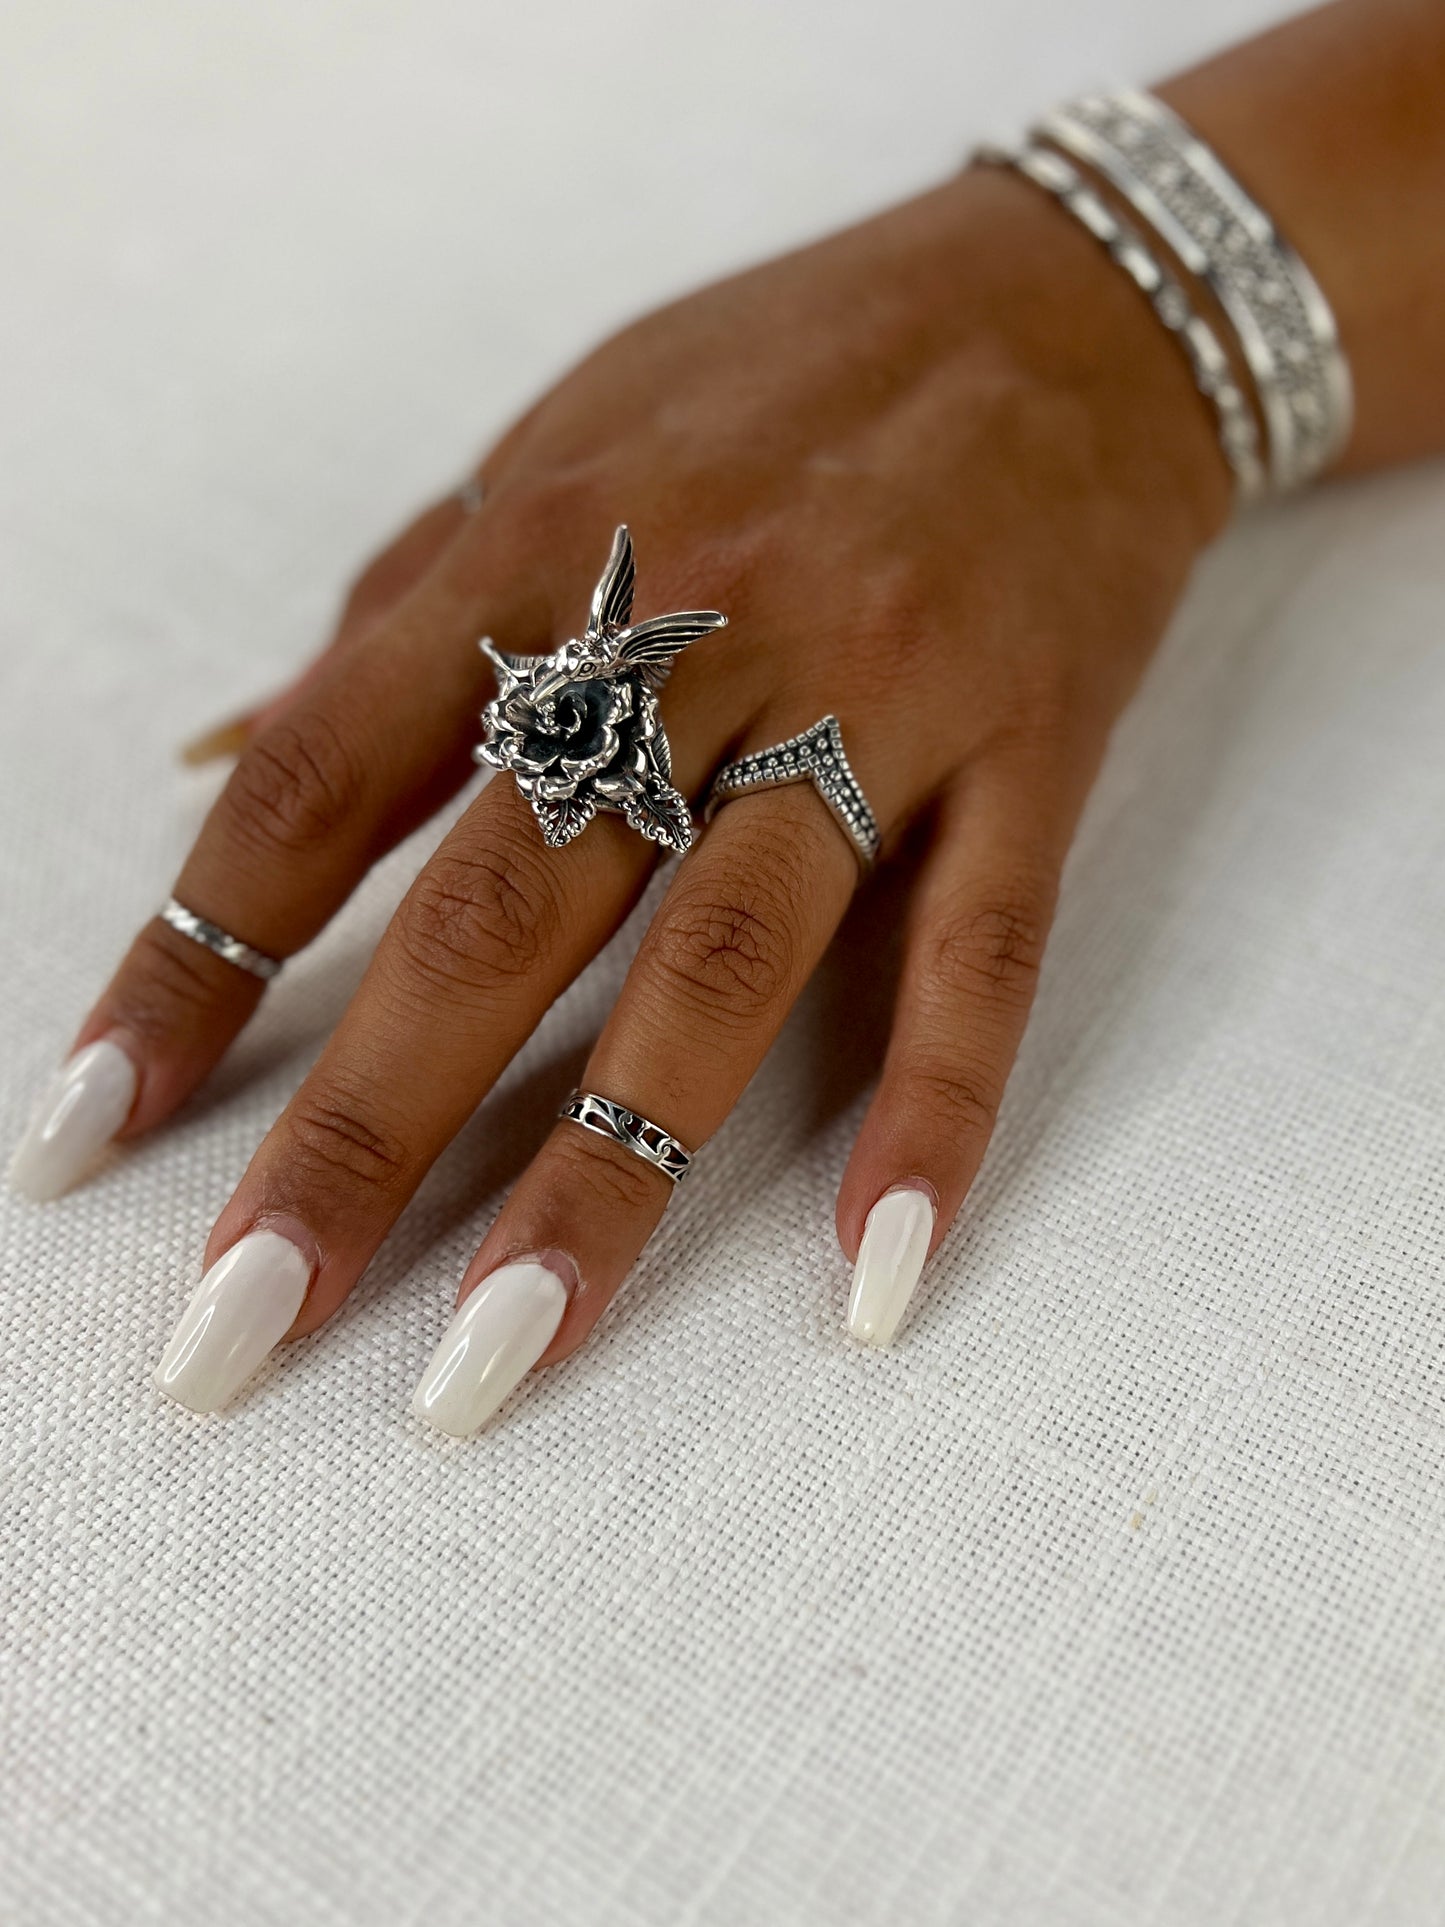 
                  
                    A minimalist woman's hand adorned with a Striking Chevron Ring.
                  
                